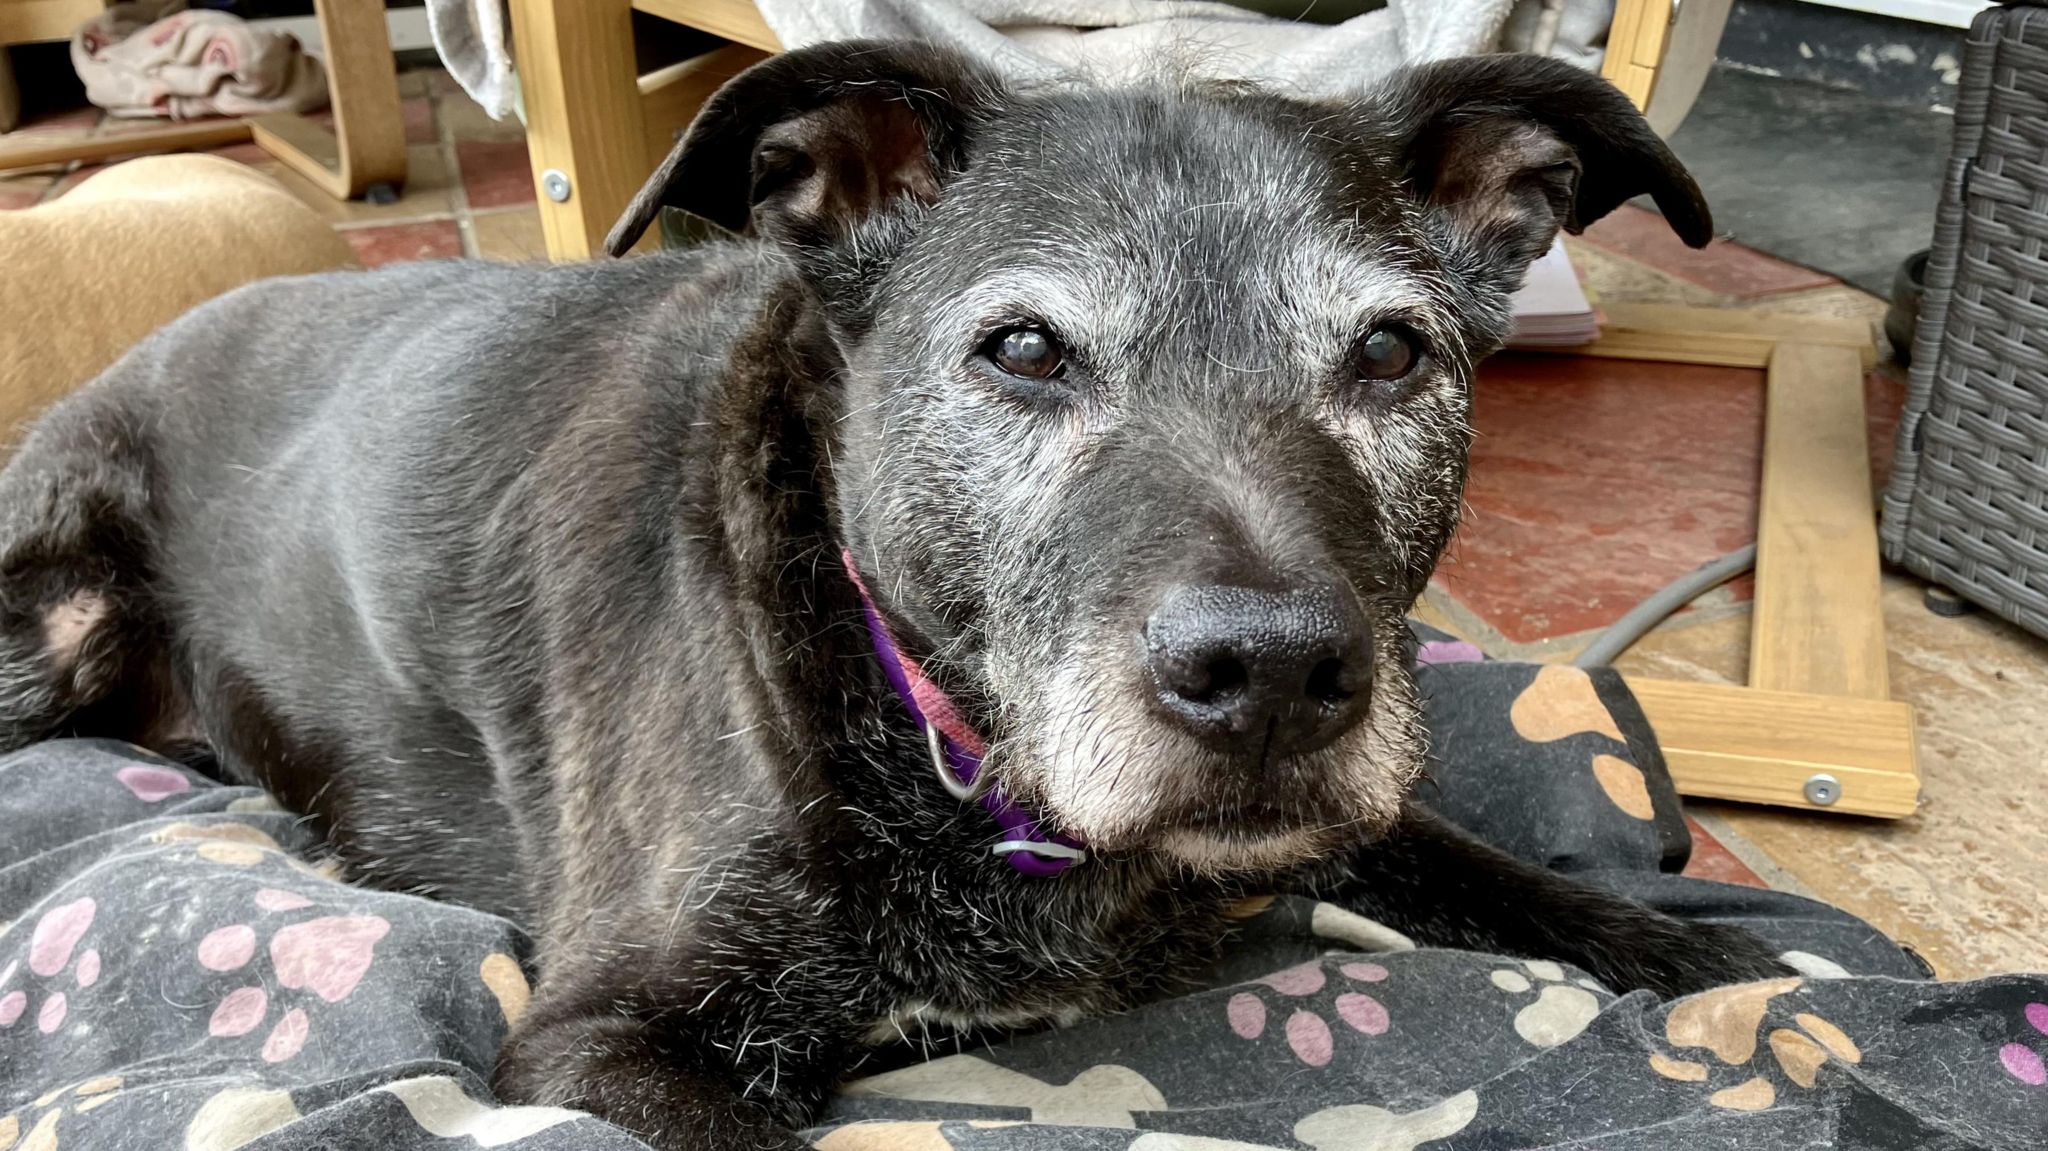 Biscuit, a black mongrel dog with grey hairs on her muzzle, lies happily on a blanket